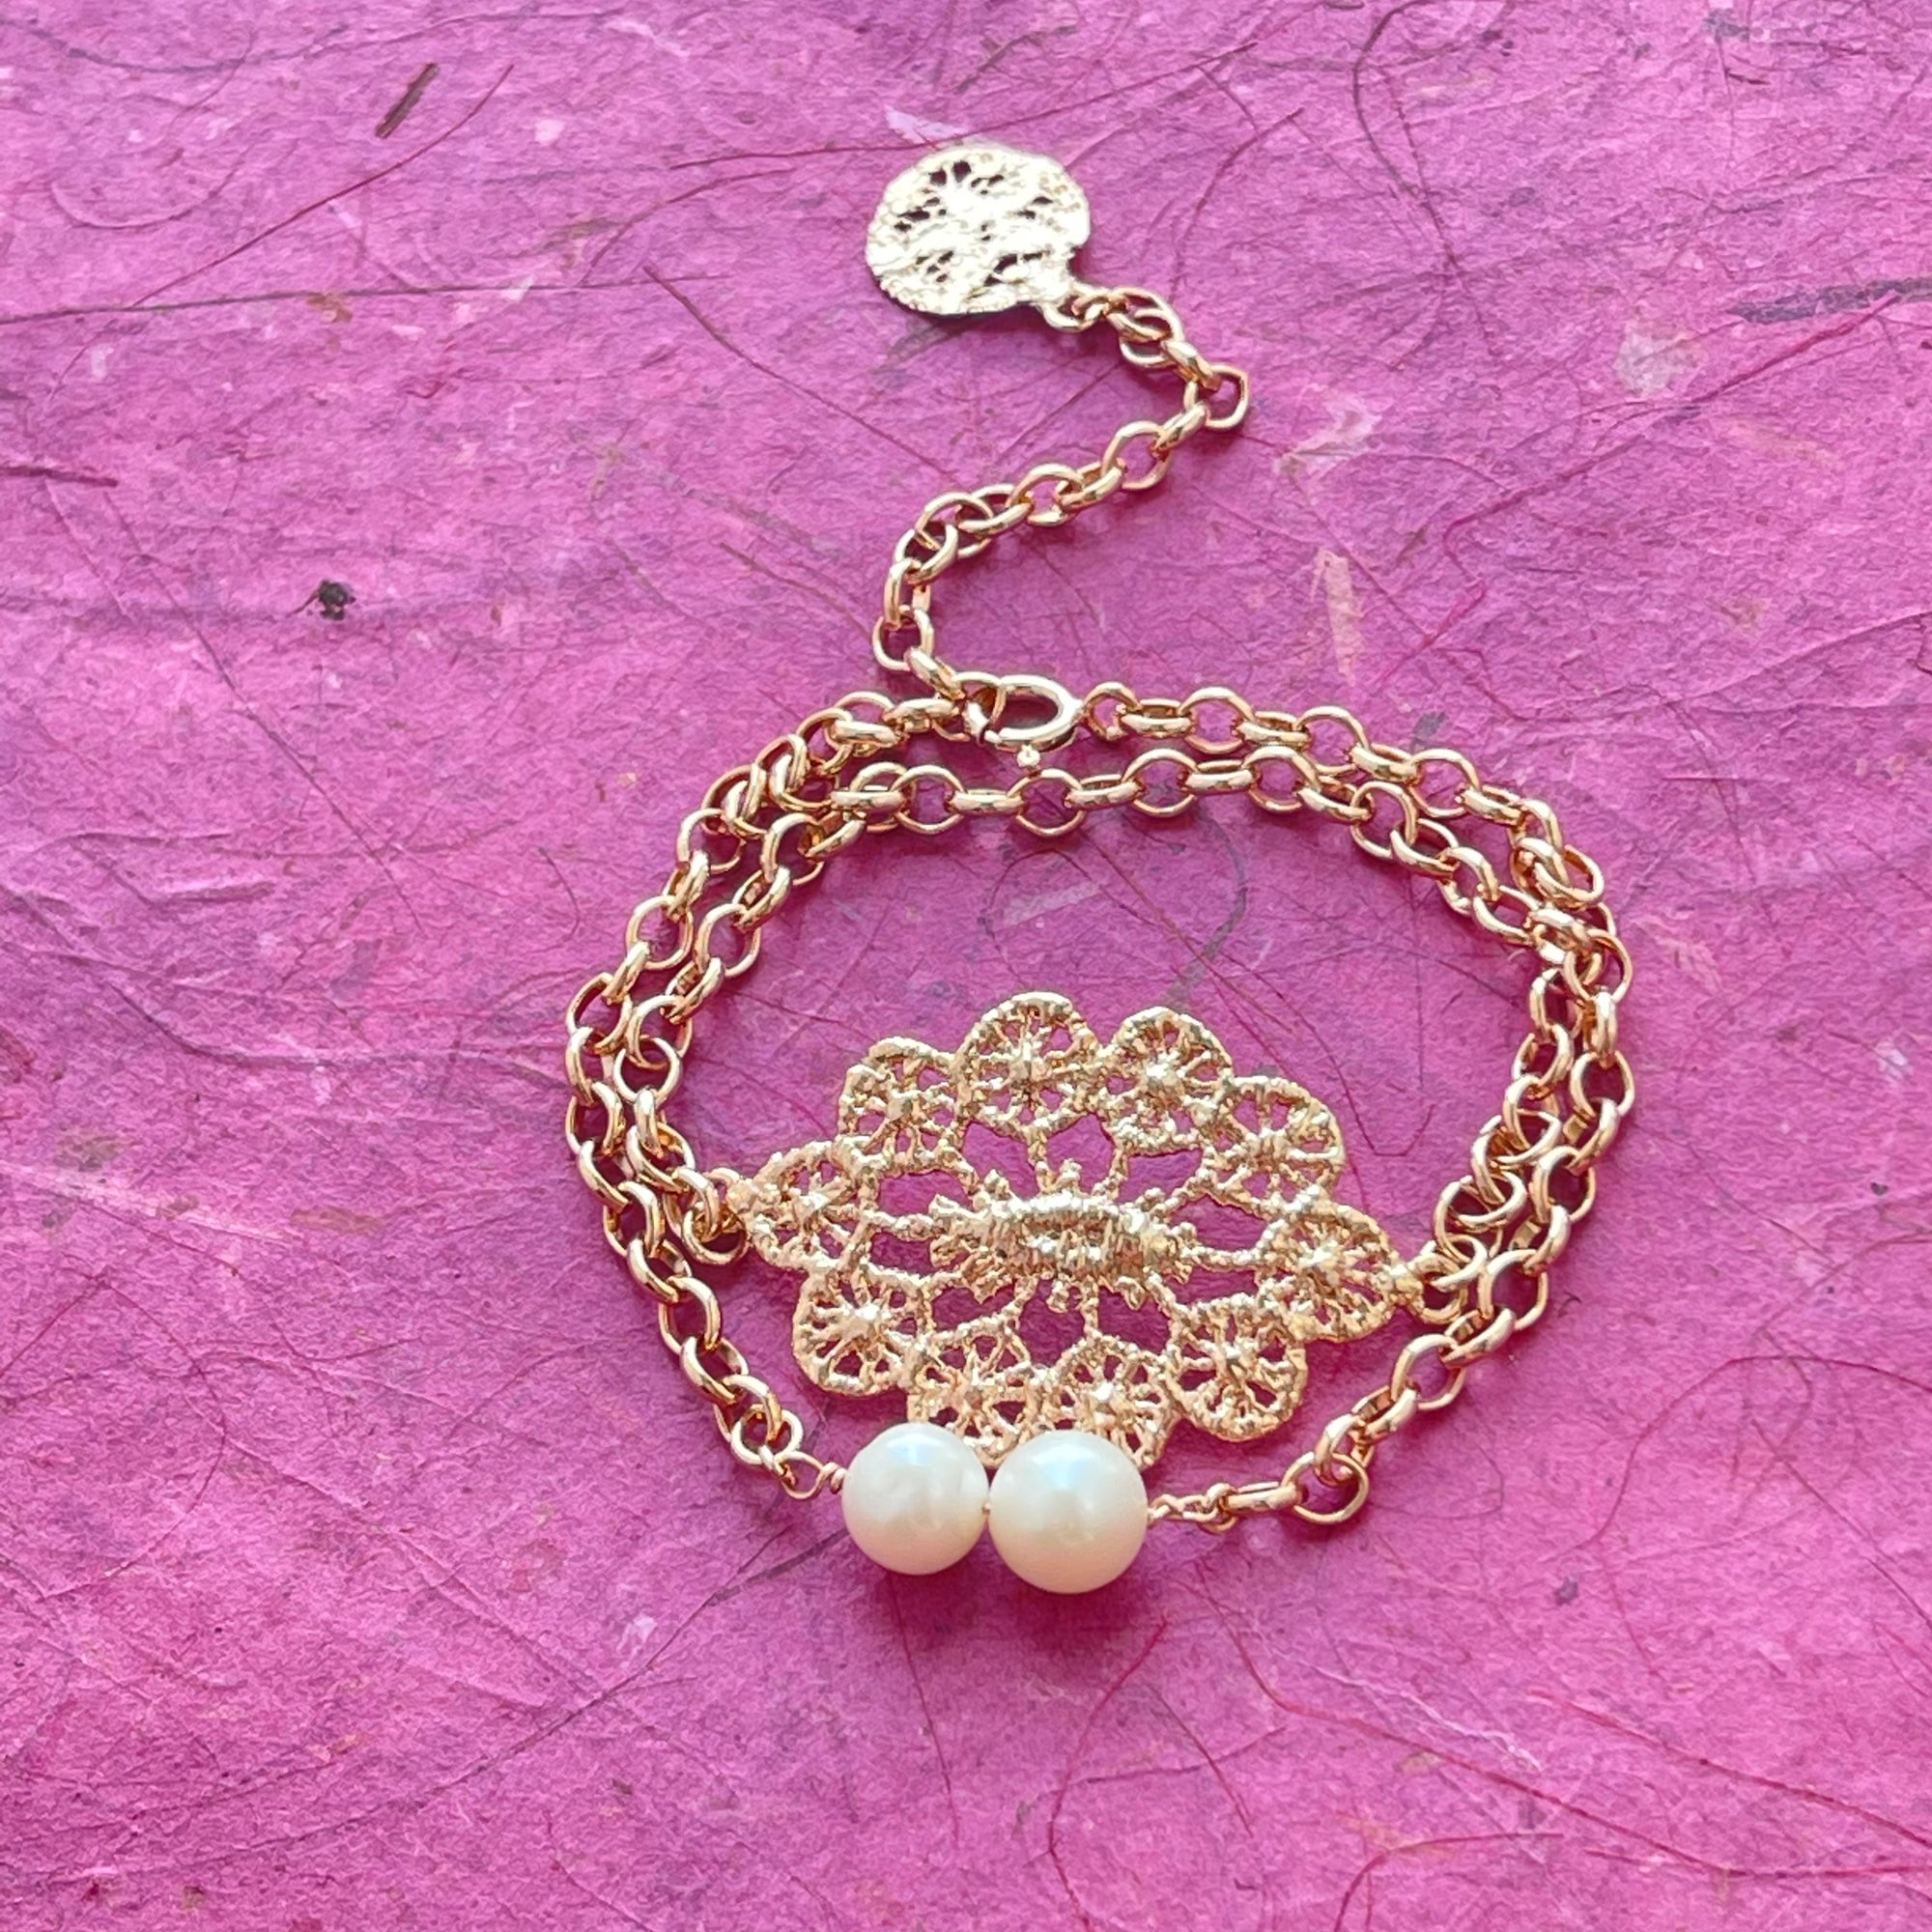 Exquisite chain bracelet with lace medaillon in sterling silver and two white pearls.